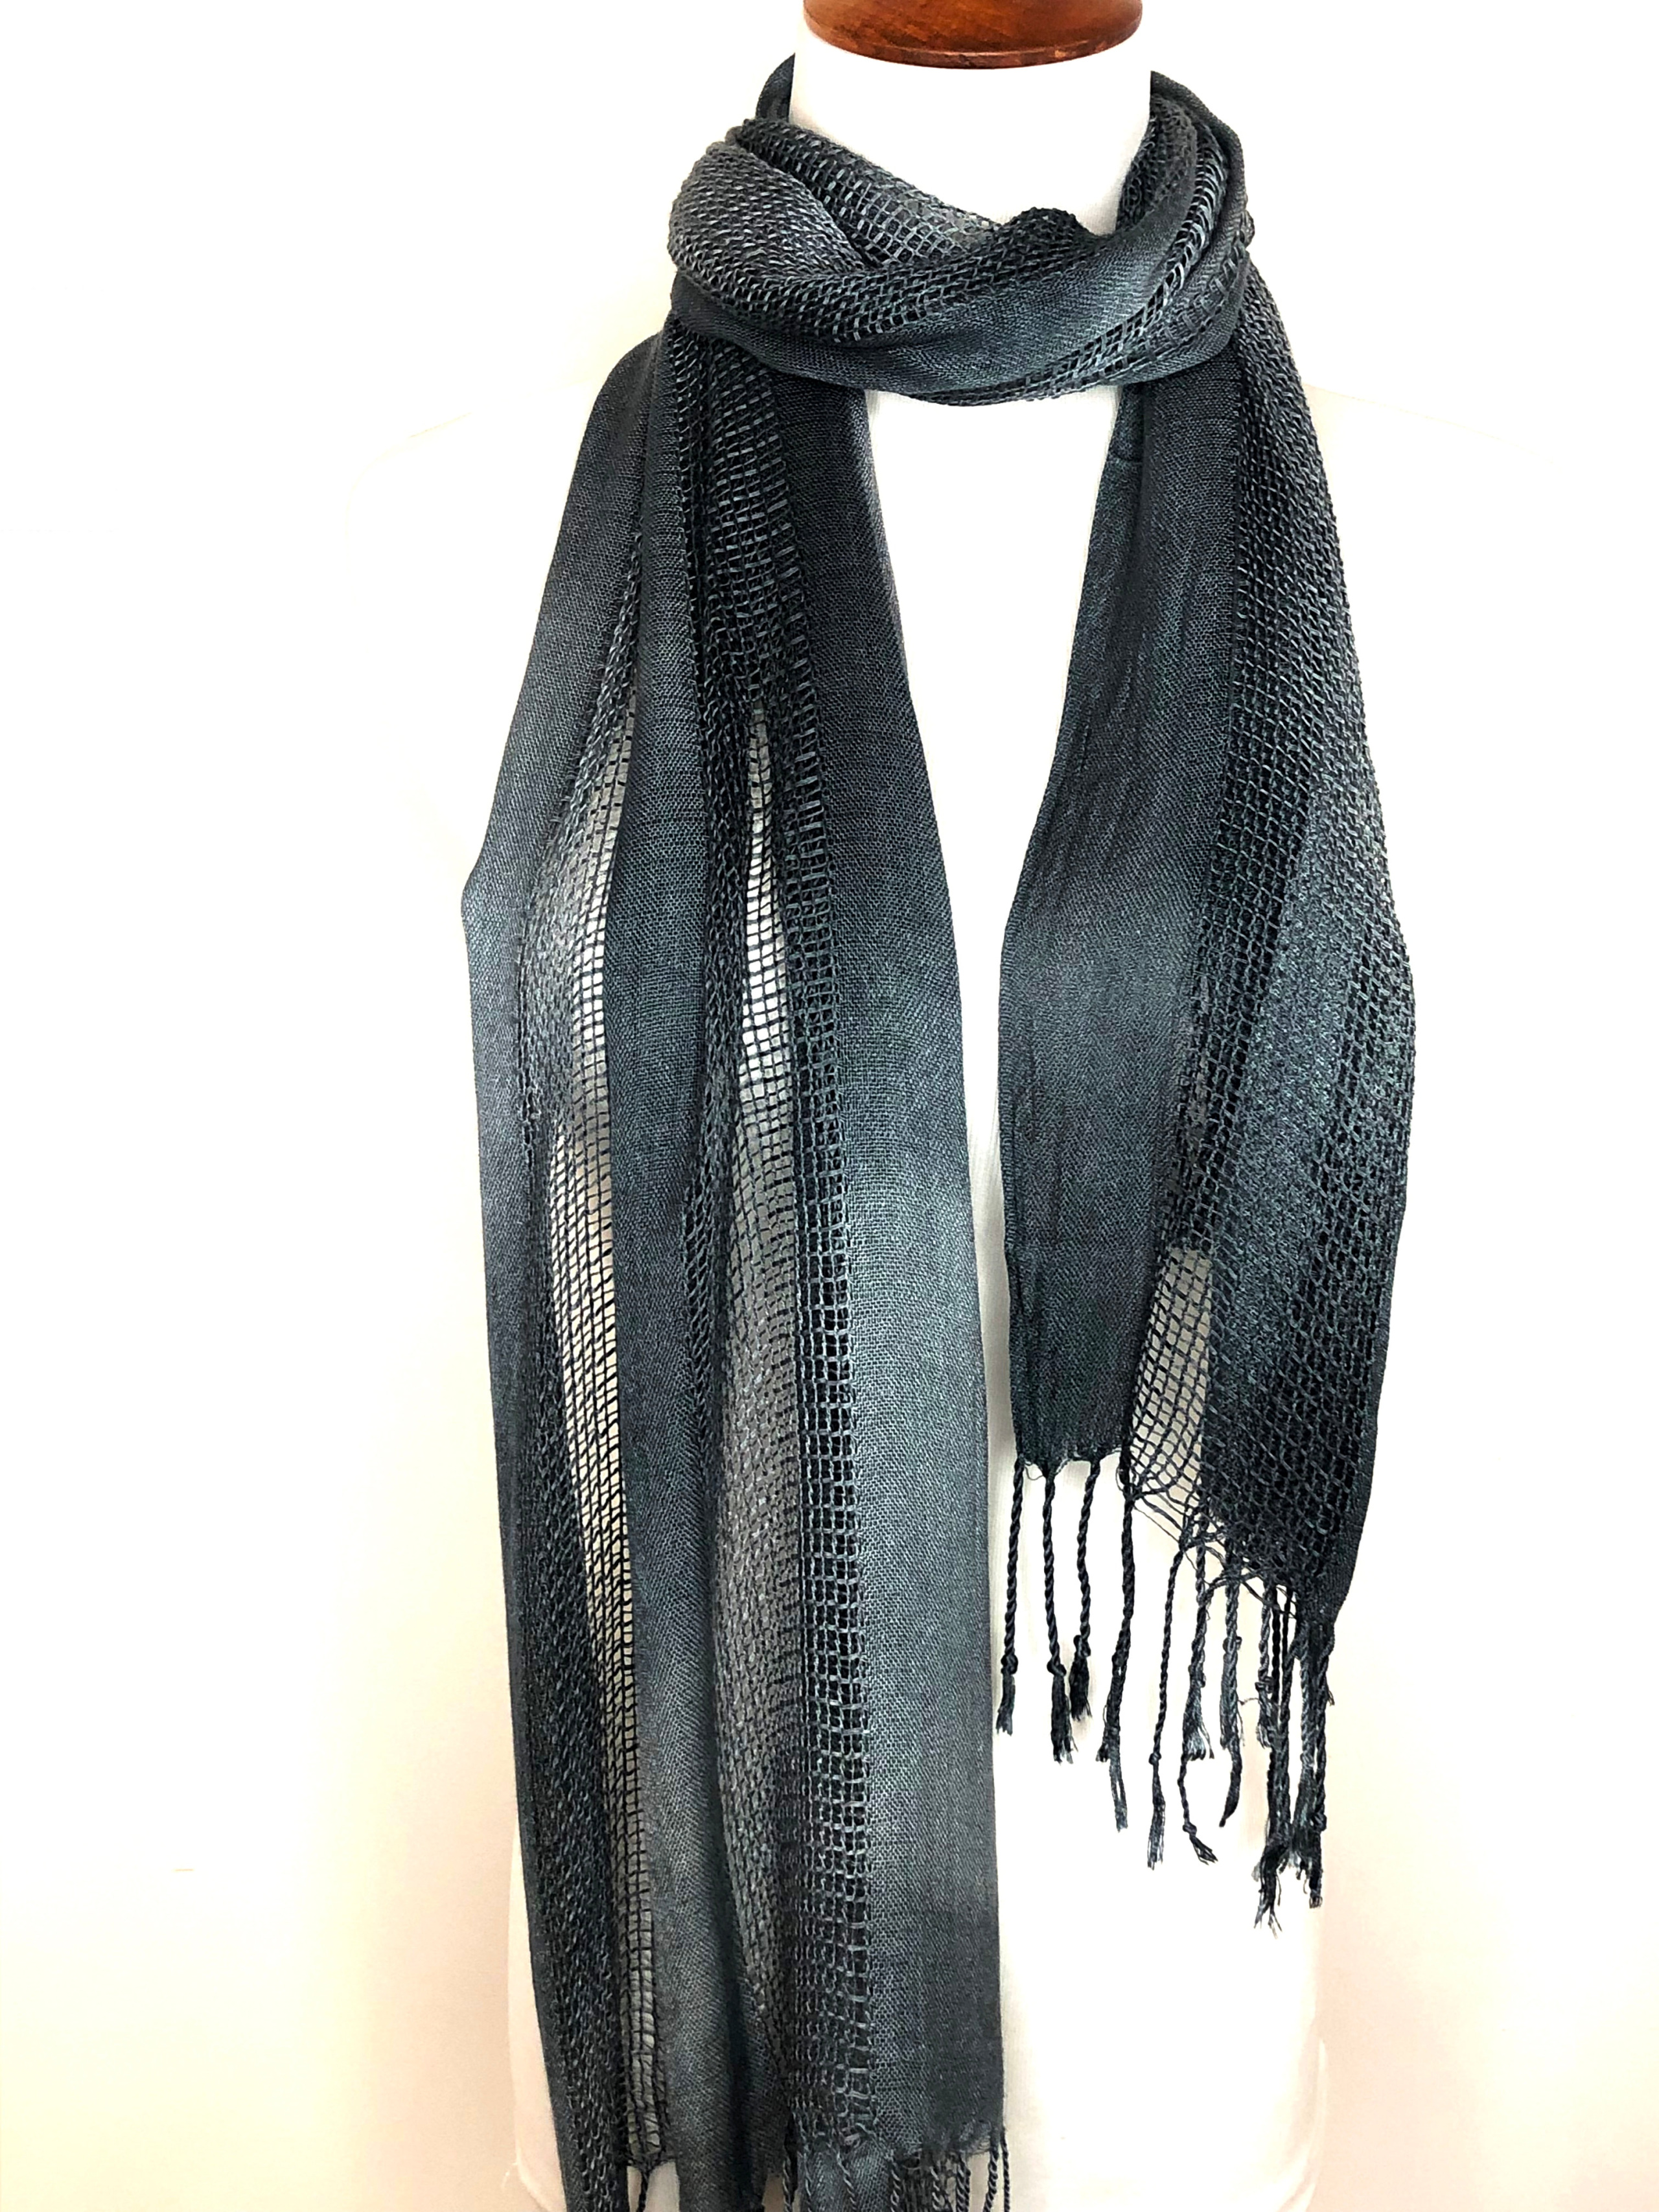 Natural Dye Scarf -Midnite Ombre